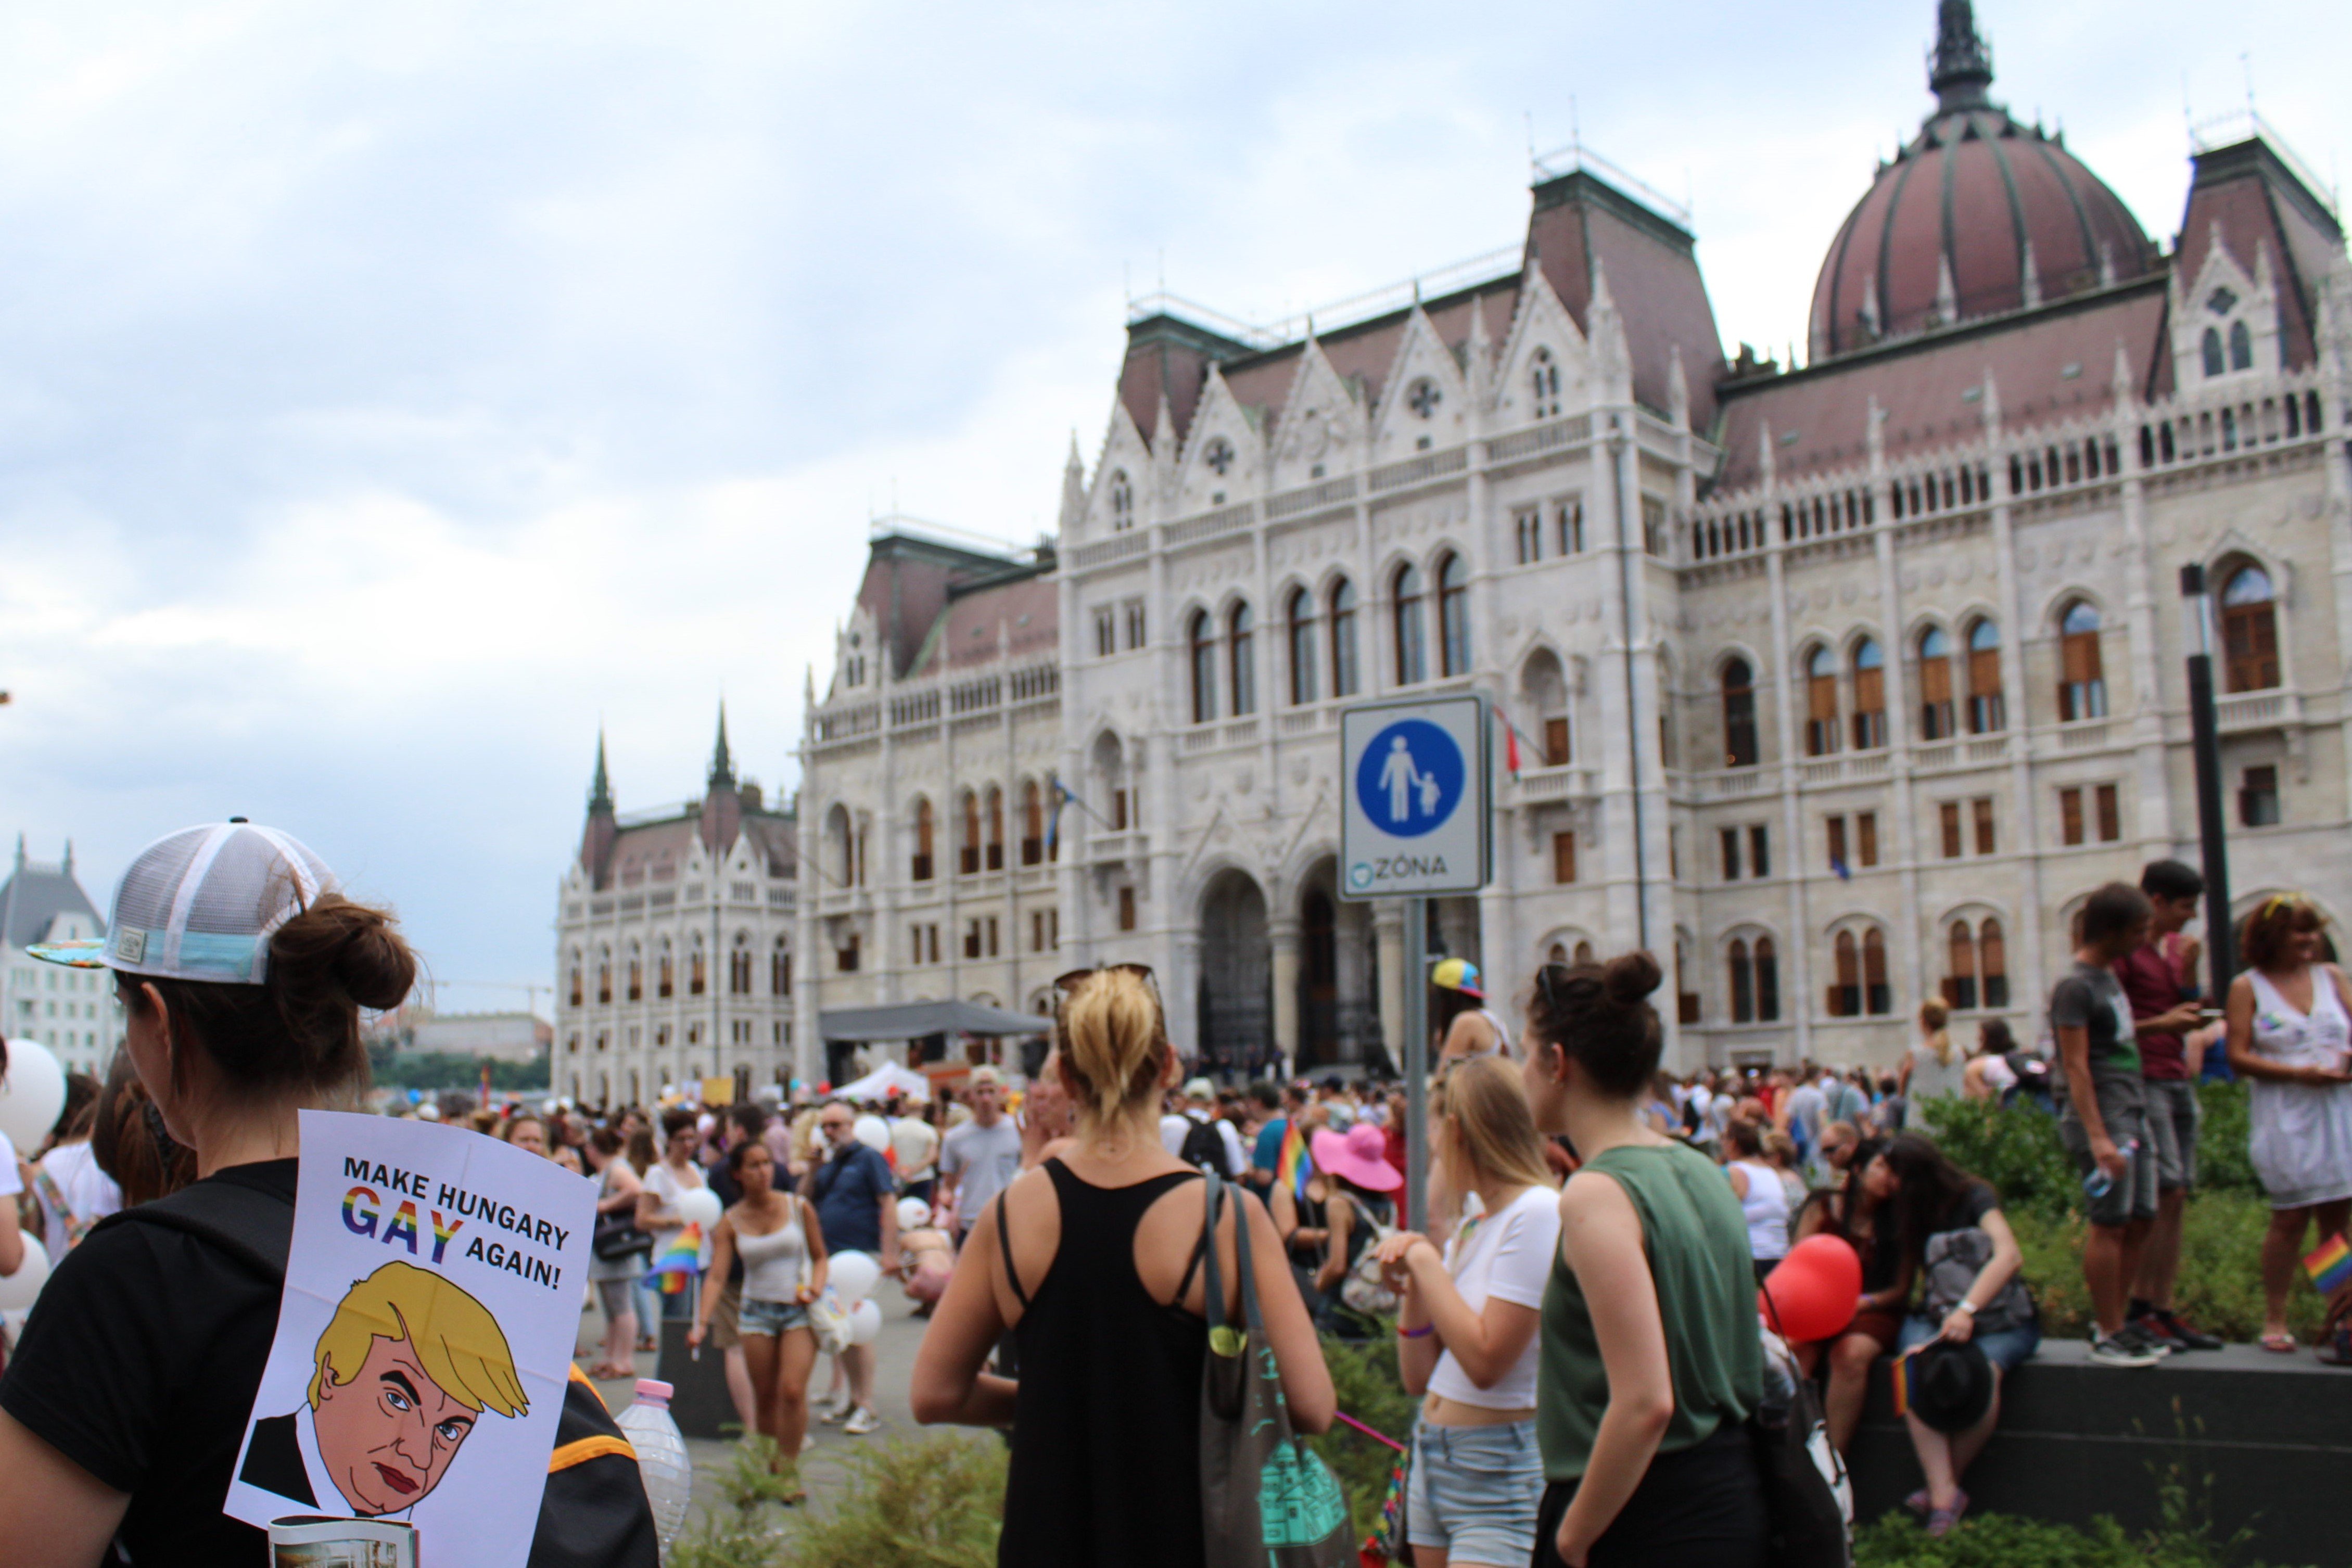 Crowds gathered in front of Kossuth Lajos tér in front of the Hungarian Parliament before the parade began on July 8, 2017.